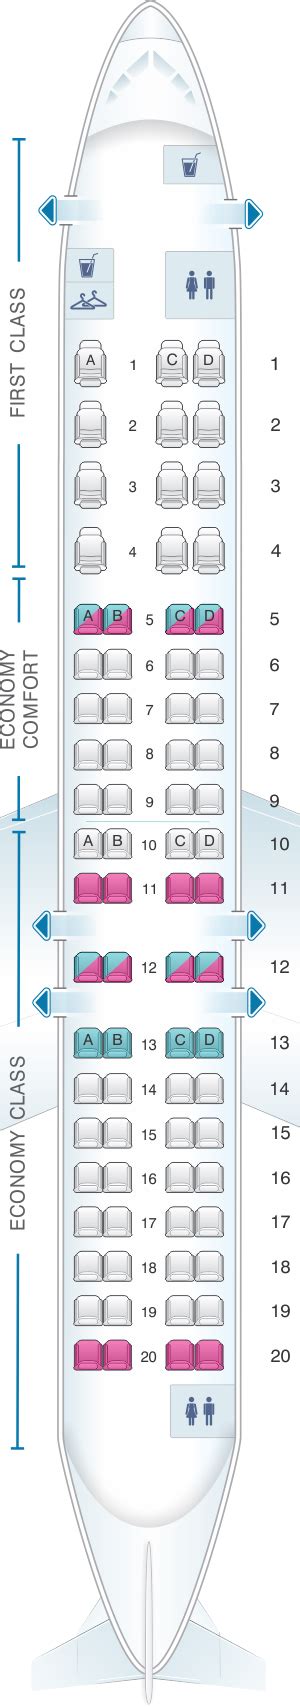 Bombardier crj 900 seat map. Things To Know About Bombardier crj 900 seat map. 